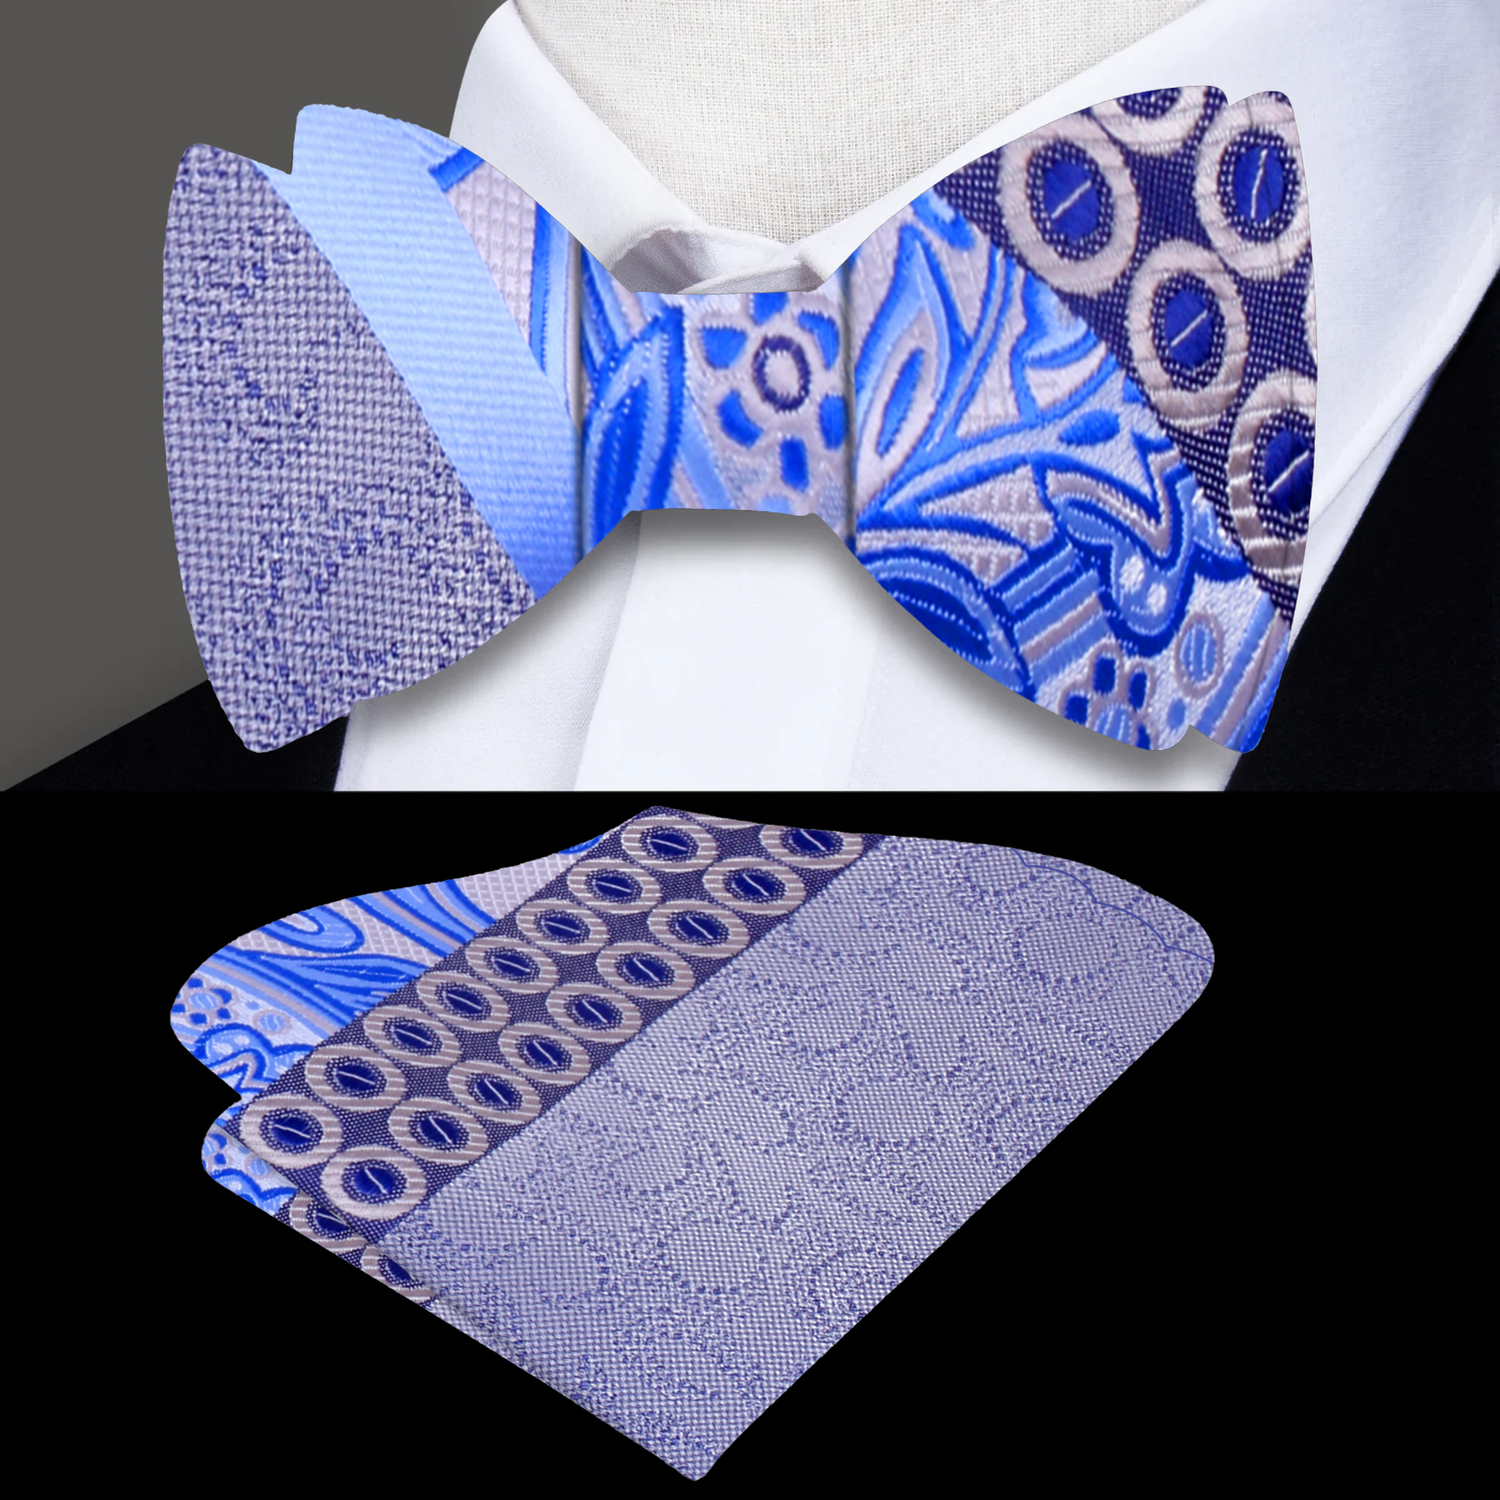 Main: A Blue, Grey Abstract Waves, Paisley, Dot Pattern Silk Self Tie Bow Tie, With Matching Pocket Square